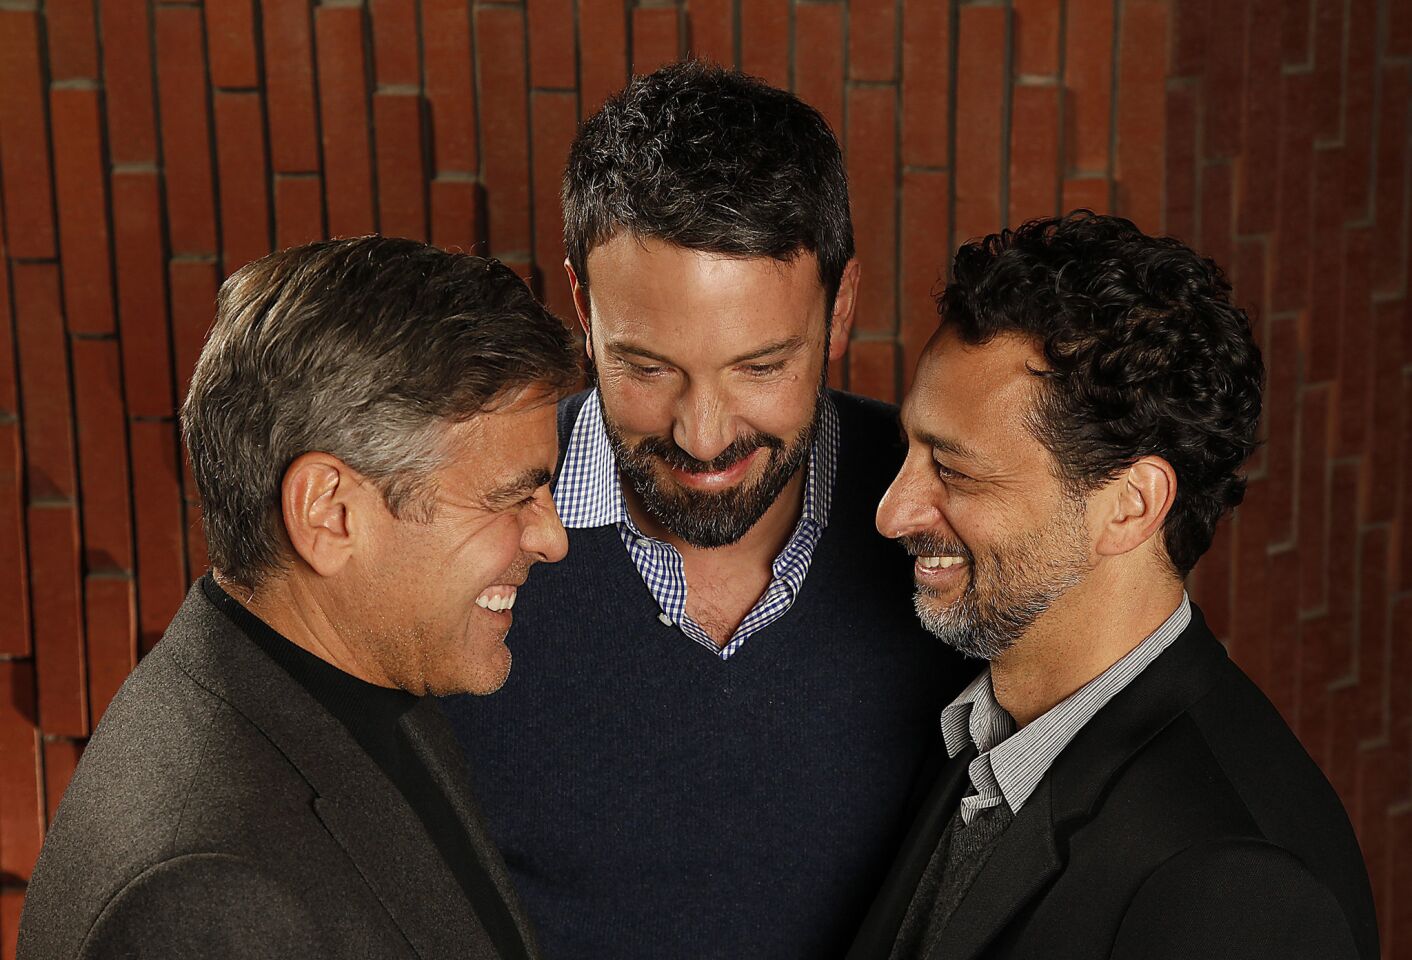 With Ben Affleck, center, and close freind Grant Heslov, Clooney held the producer's role in the political thriller "Argo." With Oscar nods for "Argo" in 2013, it made Clooney the only person in Academy Award history to be nominated across six categories.